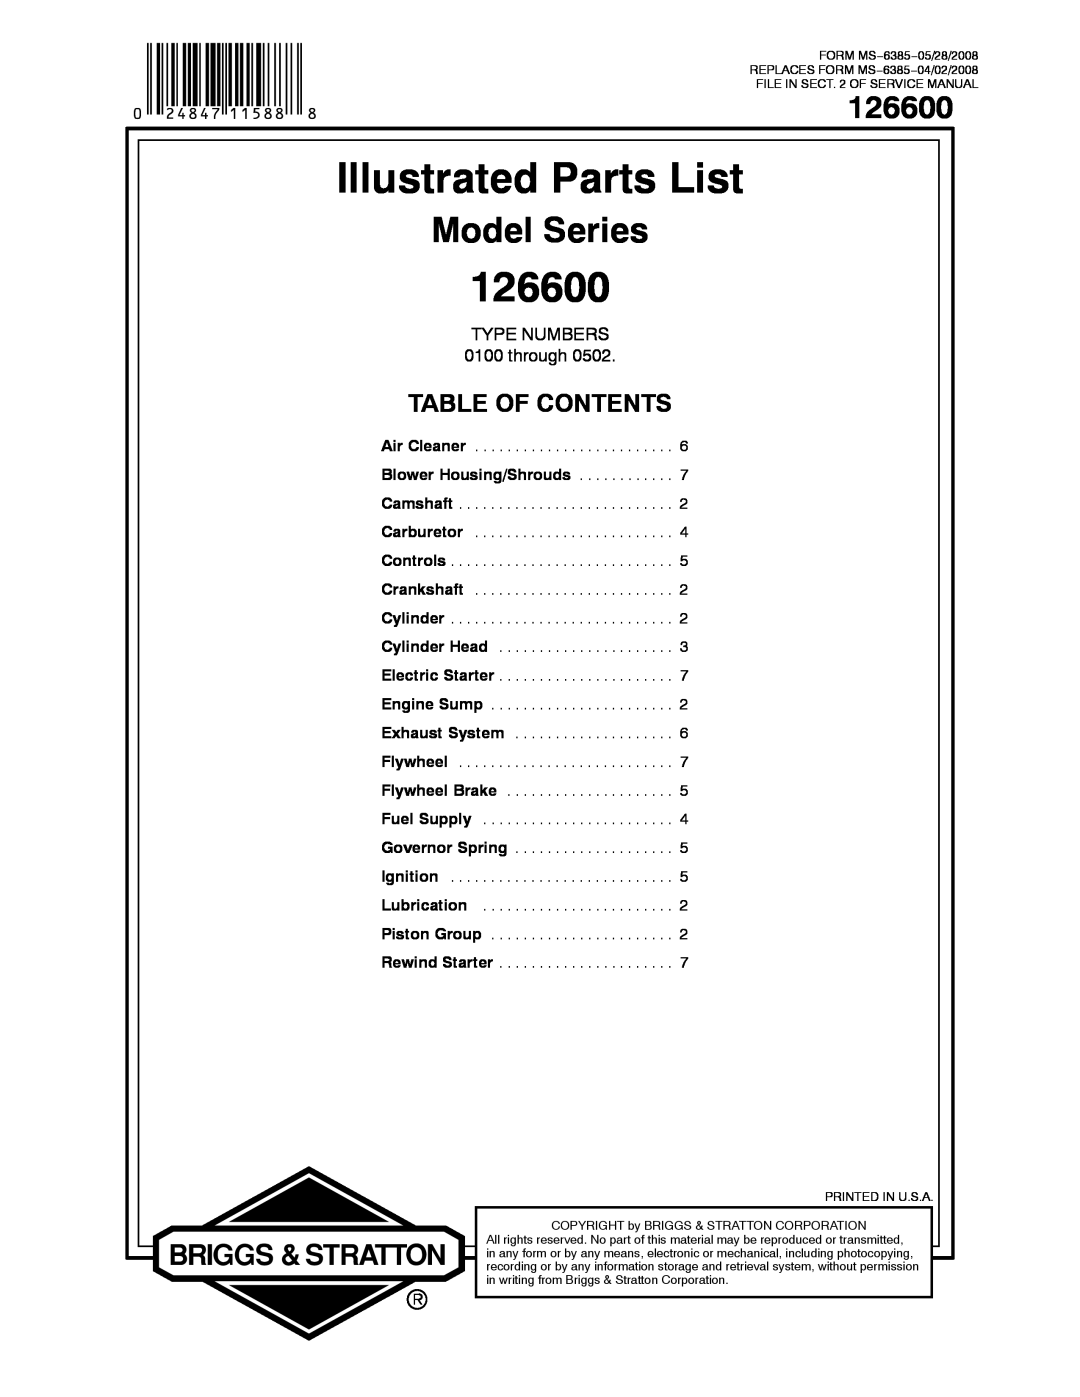 Briggs & Stratton 126600 service manual Illustrated Parts List, Model Series, Table Of Contents, TYPE NUMBERS 0100 through 